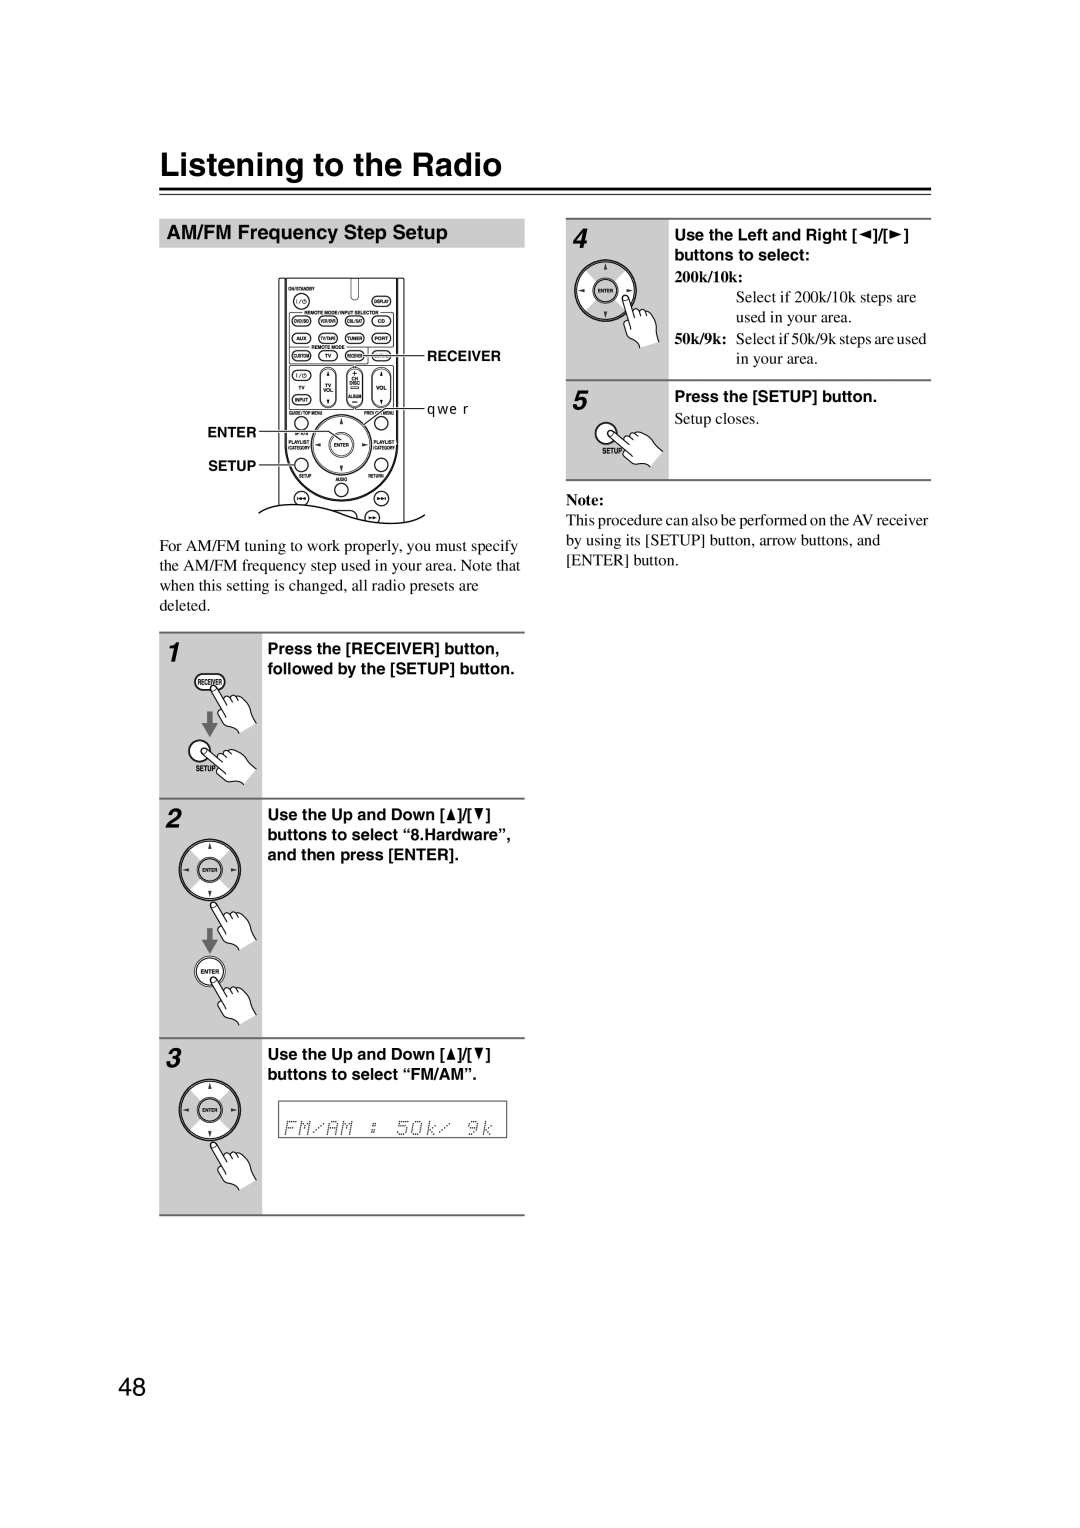 Onkyo HT-S5200 instruction manual Listening to the Radio, AM/FM Frequency Step Setup, Buttons to select 8.Hardware 